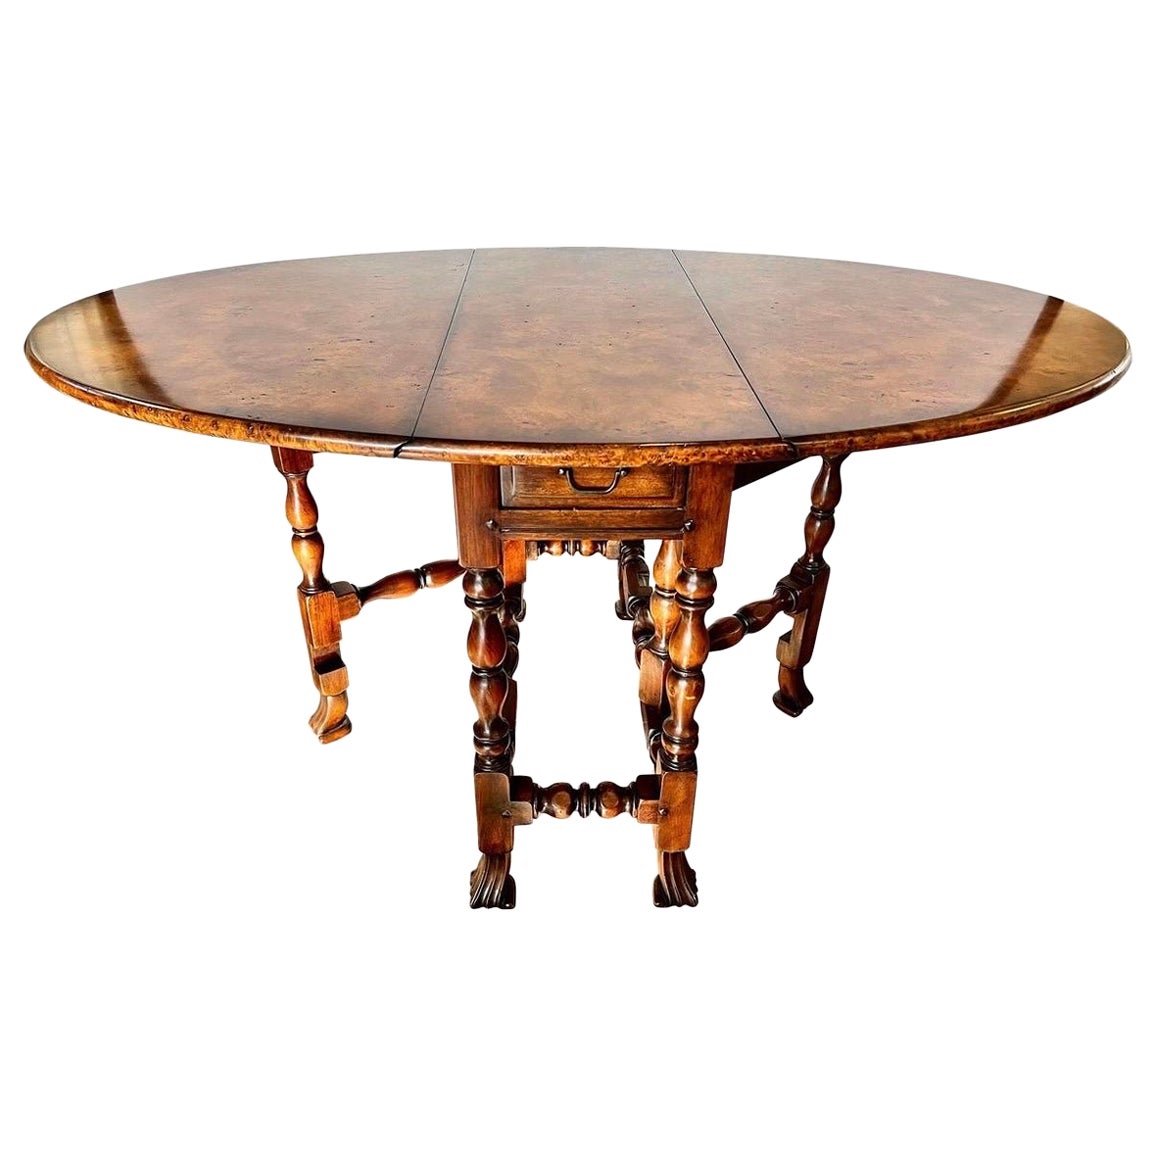 Theodore Alexander Antiqued Drop-leaf Gate-leg Dining Console or Center Table